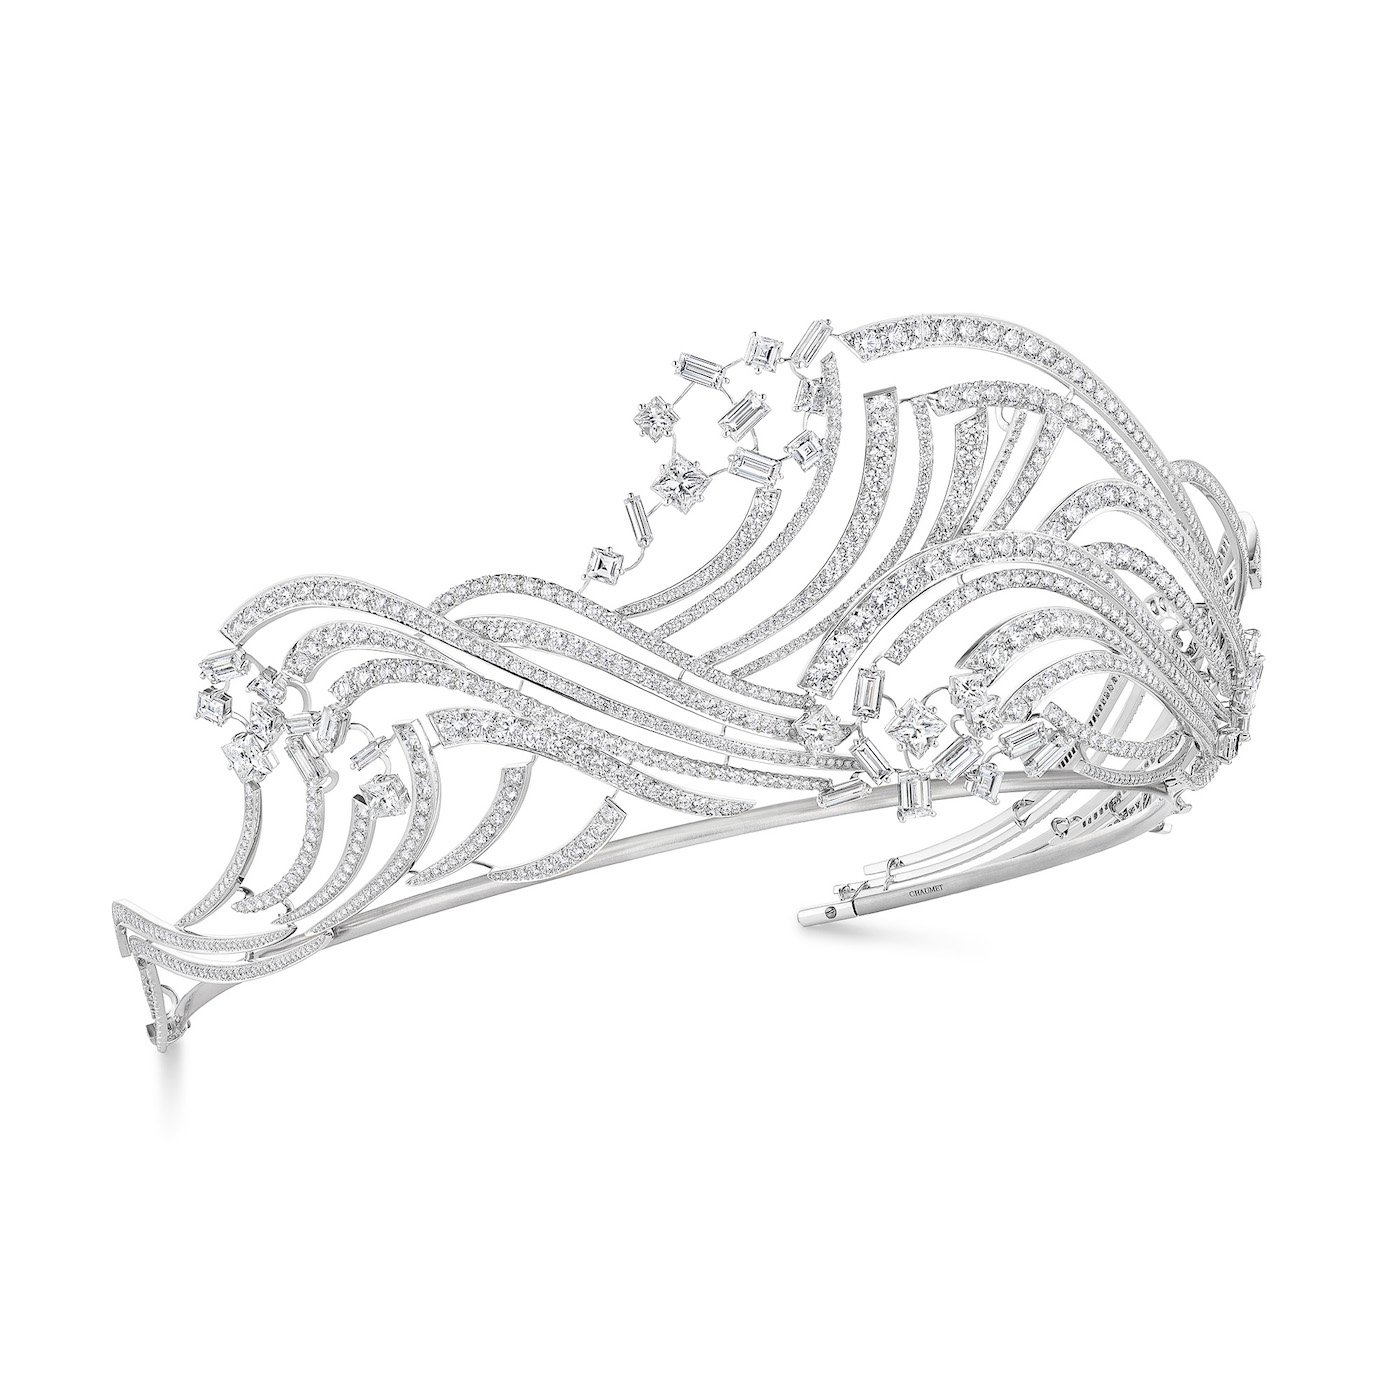 Want A Tiara? Get In Line For Chaumet's Latest Collection